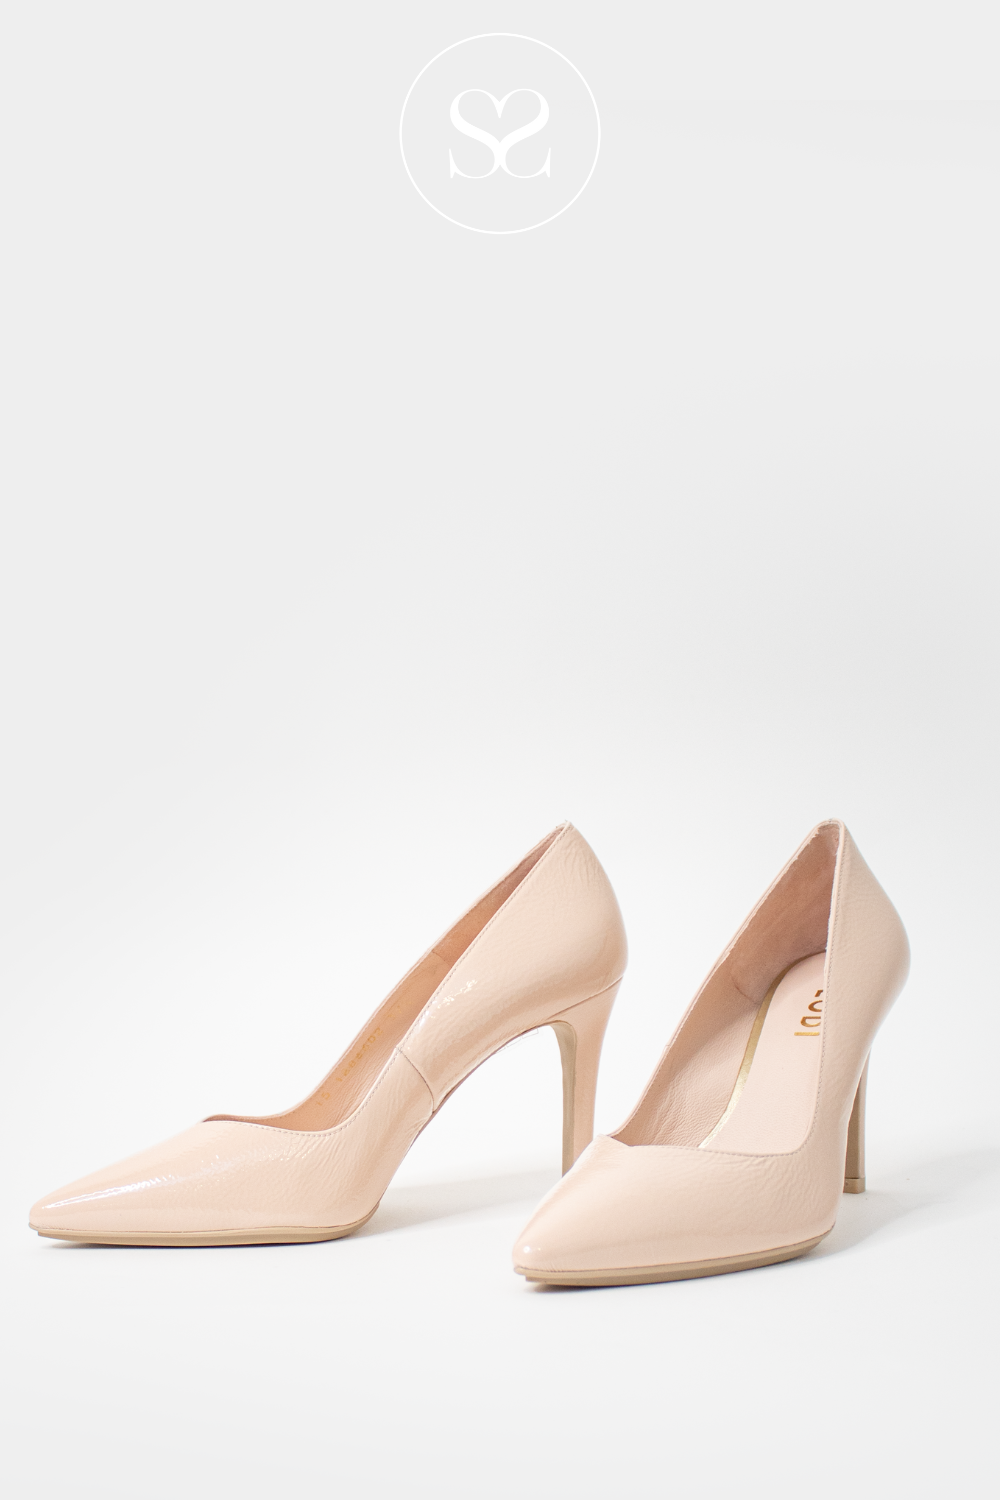 LODI RABOT NUDE PATENT POINTED TOE COURT HIGH HEEL SHOE